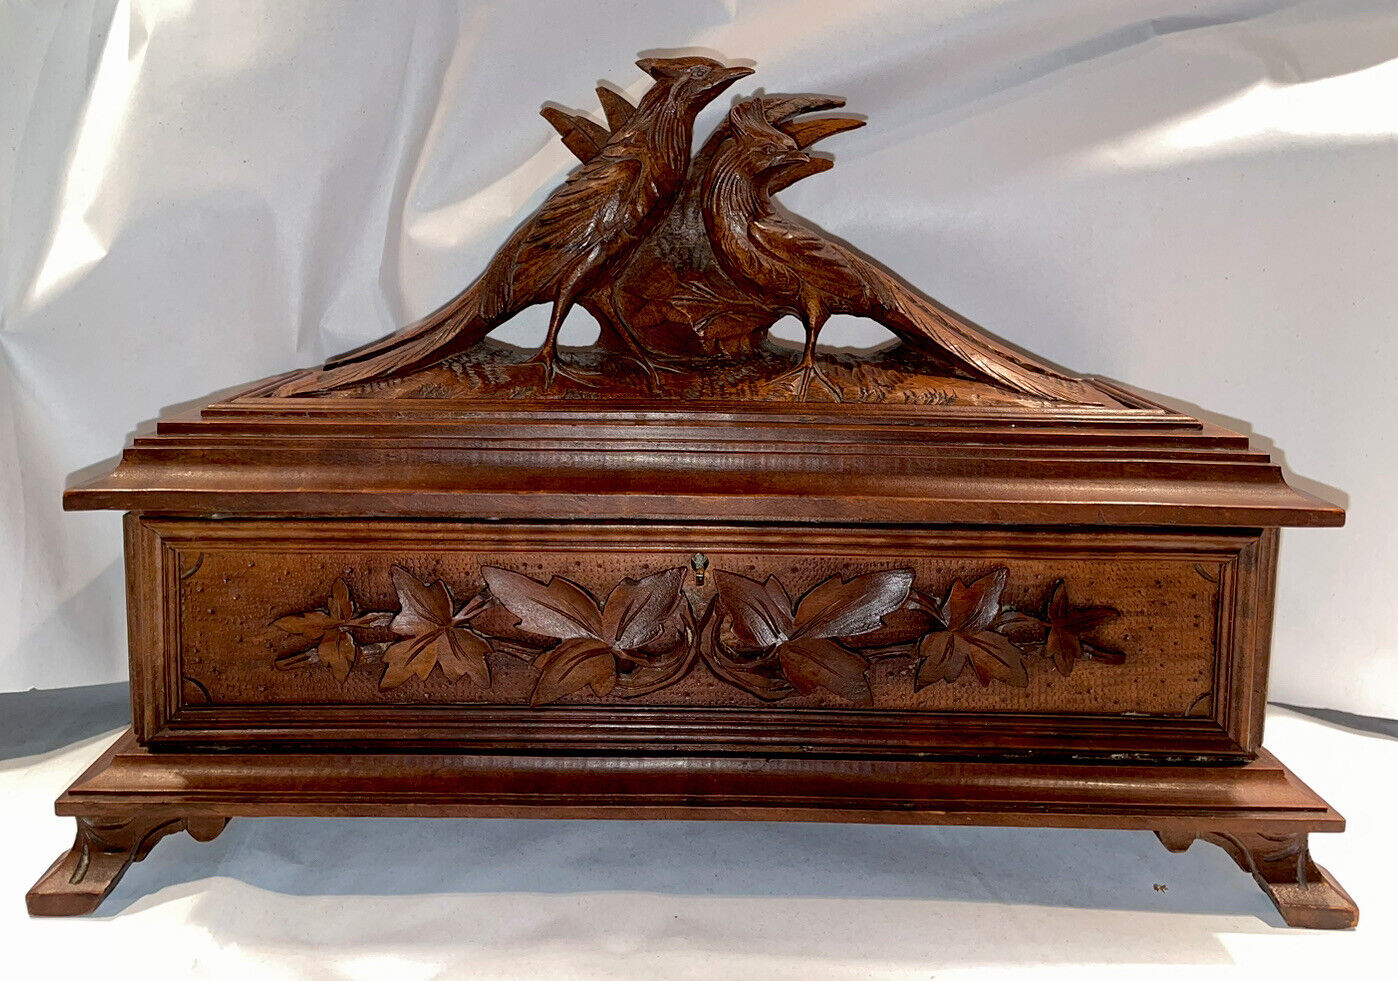 Rare Antique Black Forest Swiss/German Carved Wooden Glove/Jewelery Box- Musical